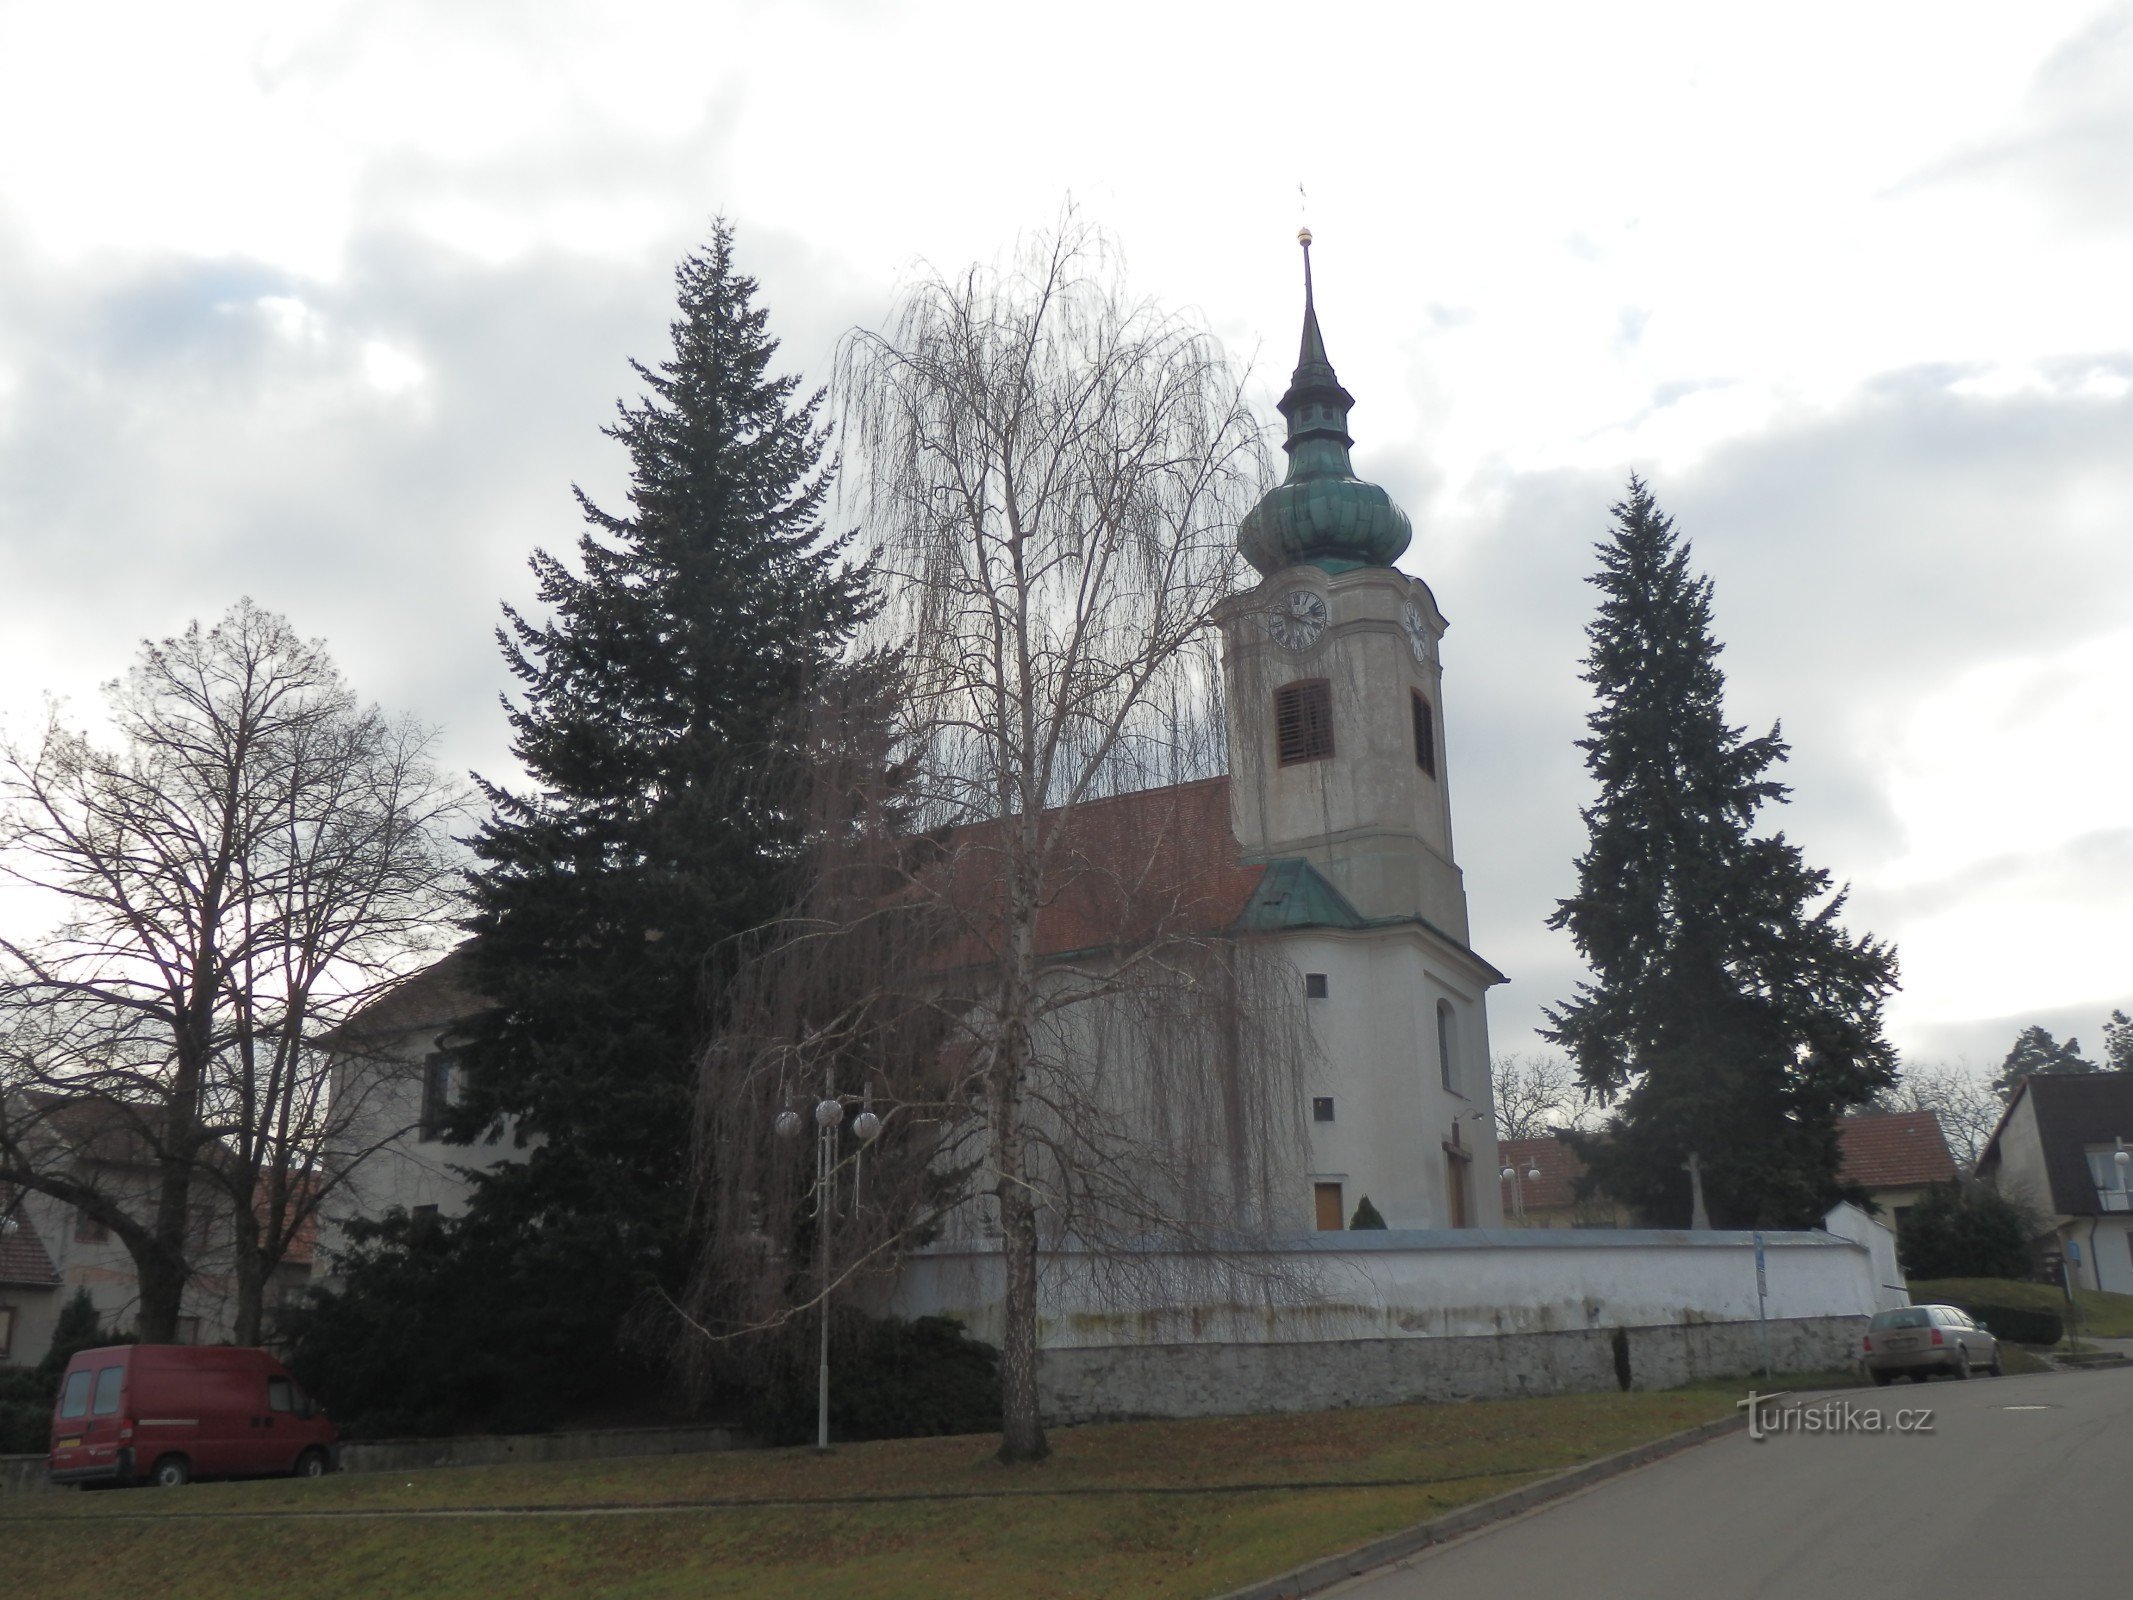 Church of the Holy Trinity in Střelice